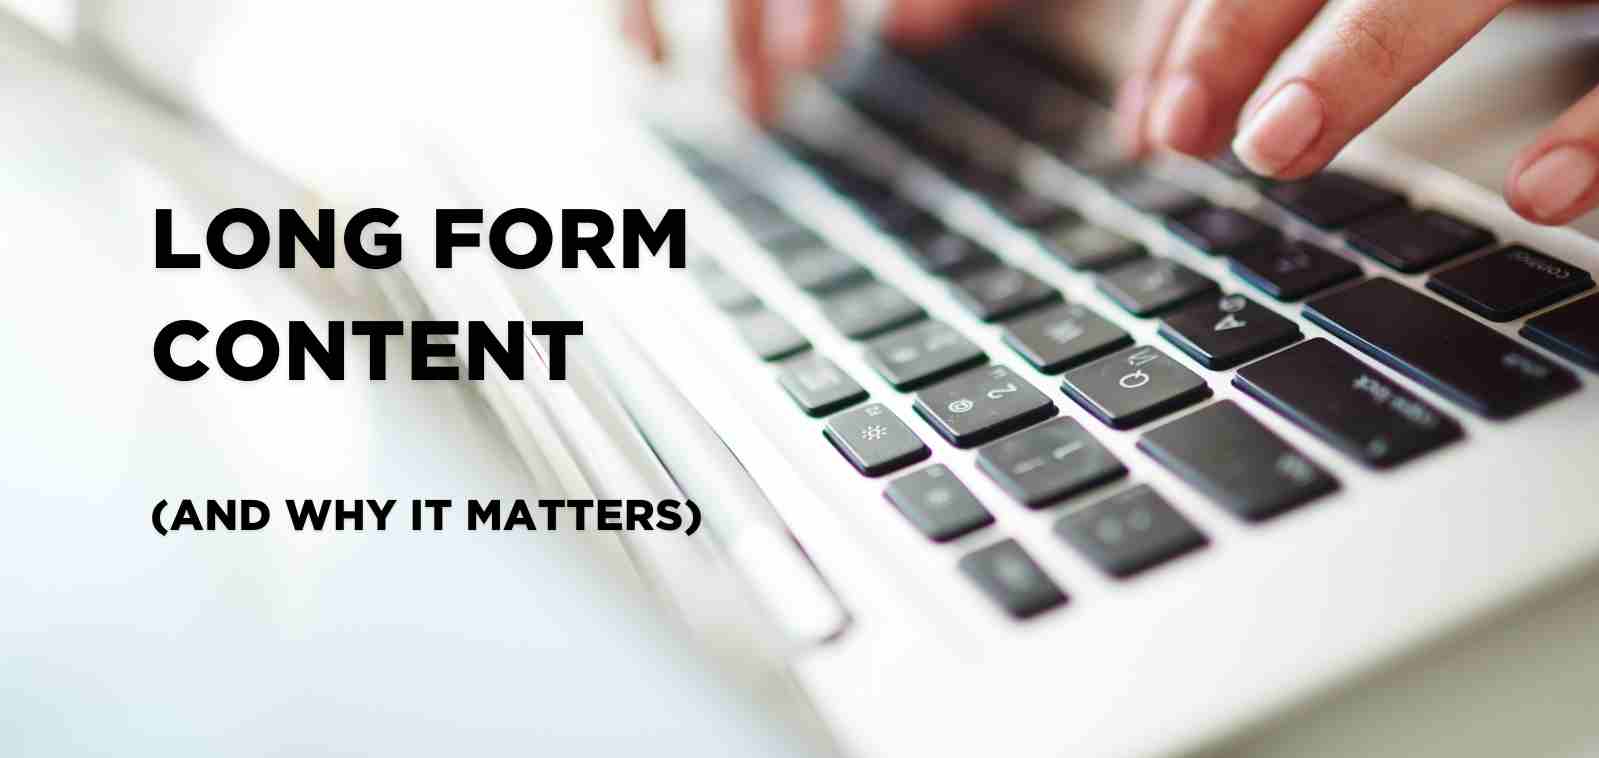 Long form content and why it matters